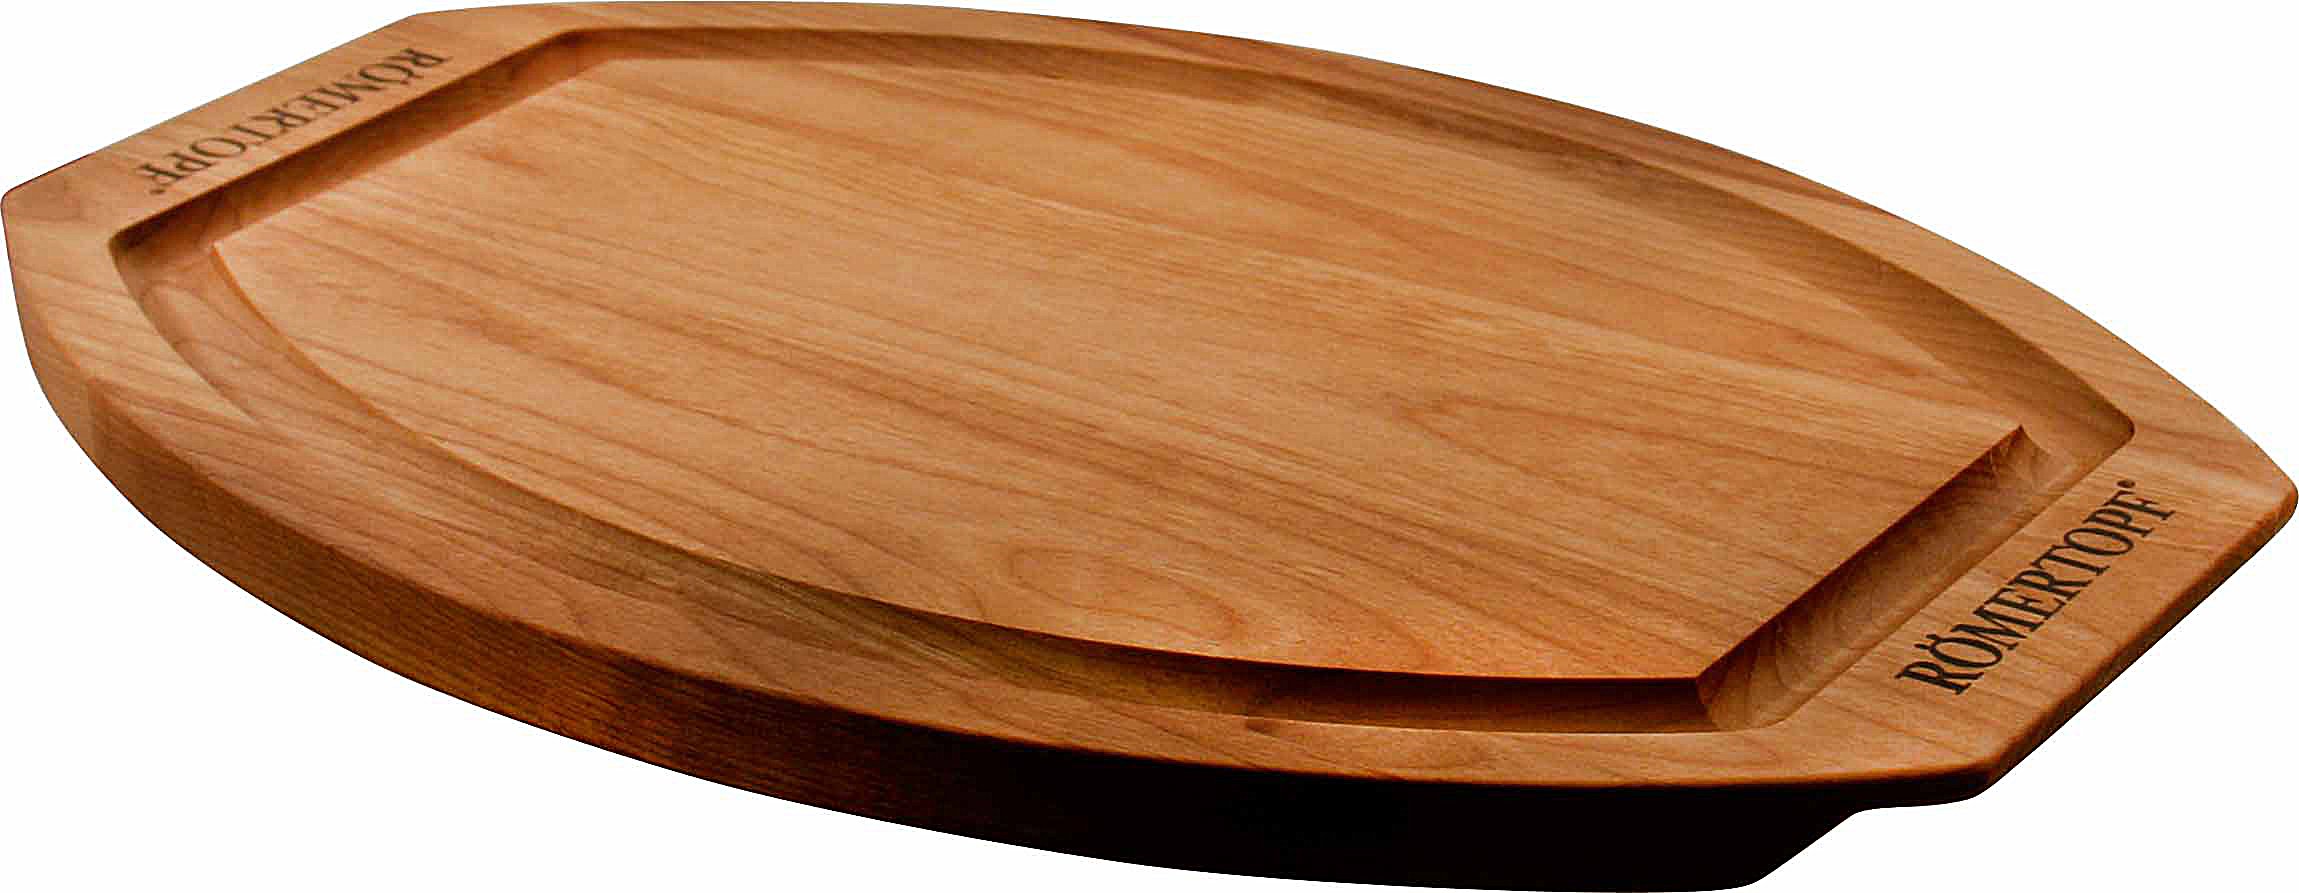 Romertopf With Juice Grooves, Made in USA Wooden Cutting Board, 16 Inch, Brown